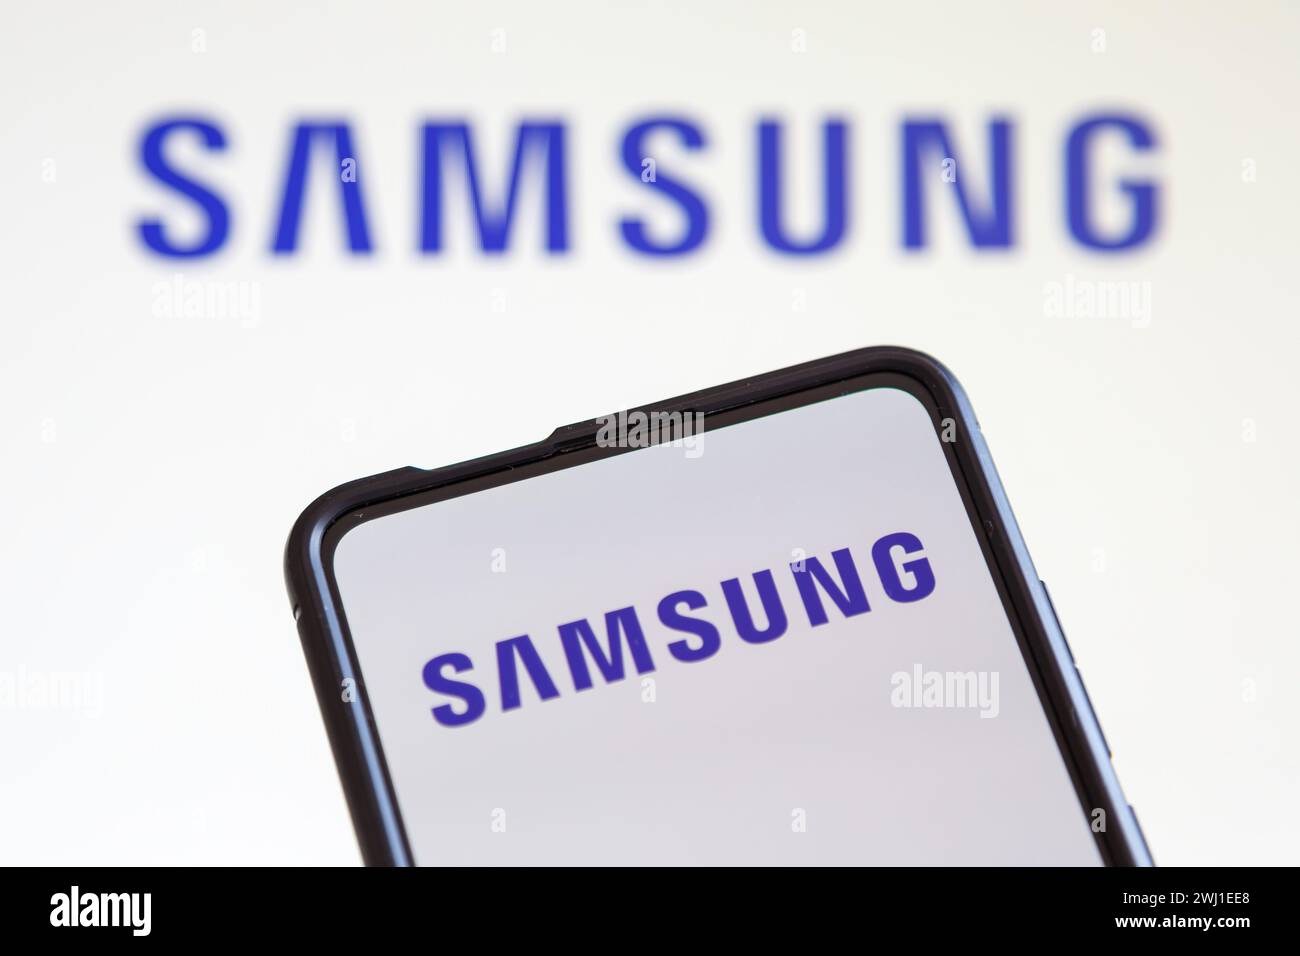 Samsung logo of the TV and smartphone manufacturer on a cell phone and screen Stock Photo